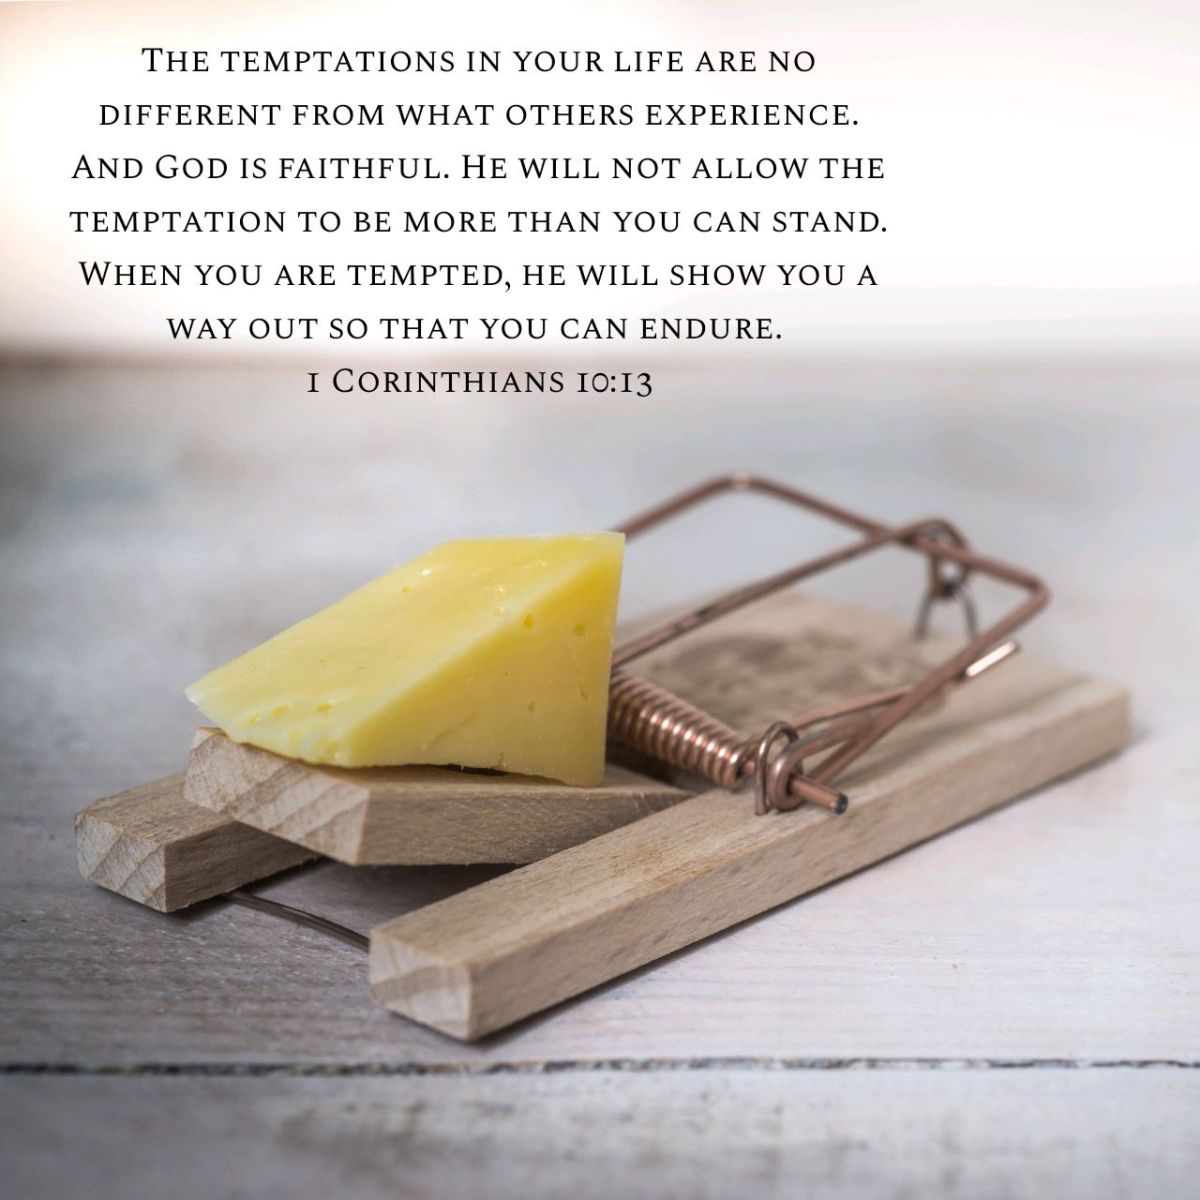 Trapped By Temptation?